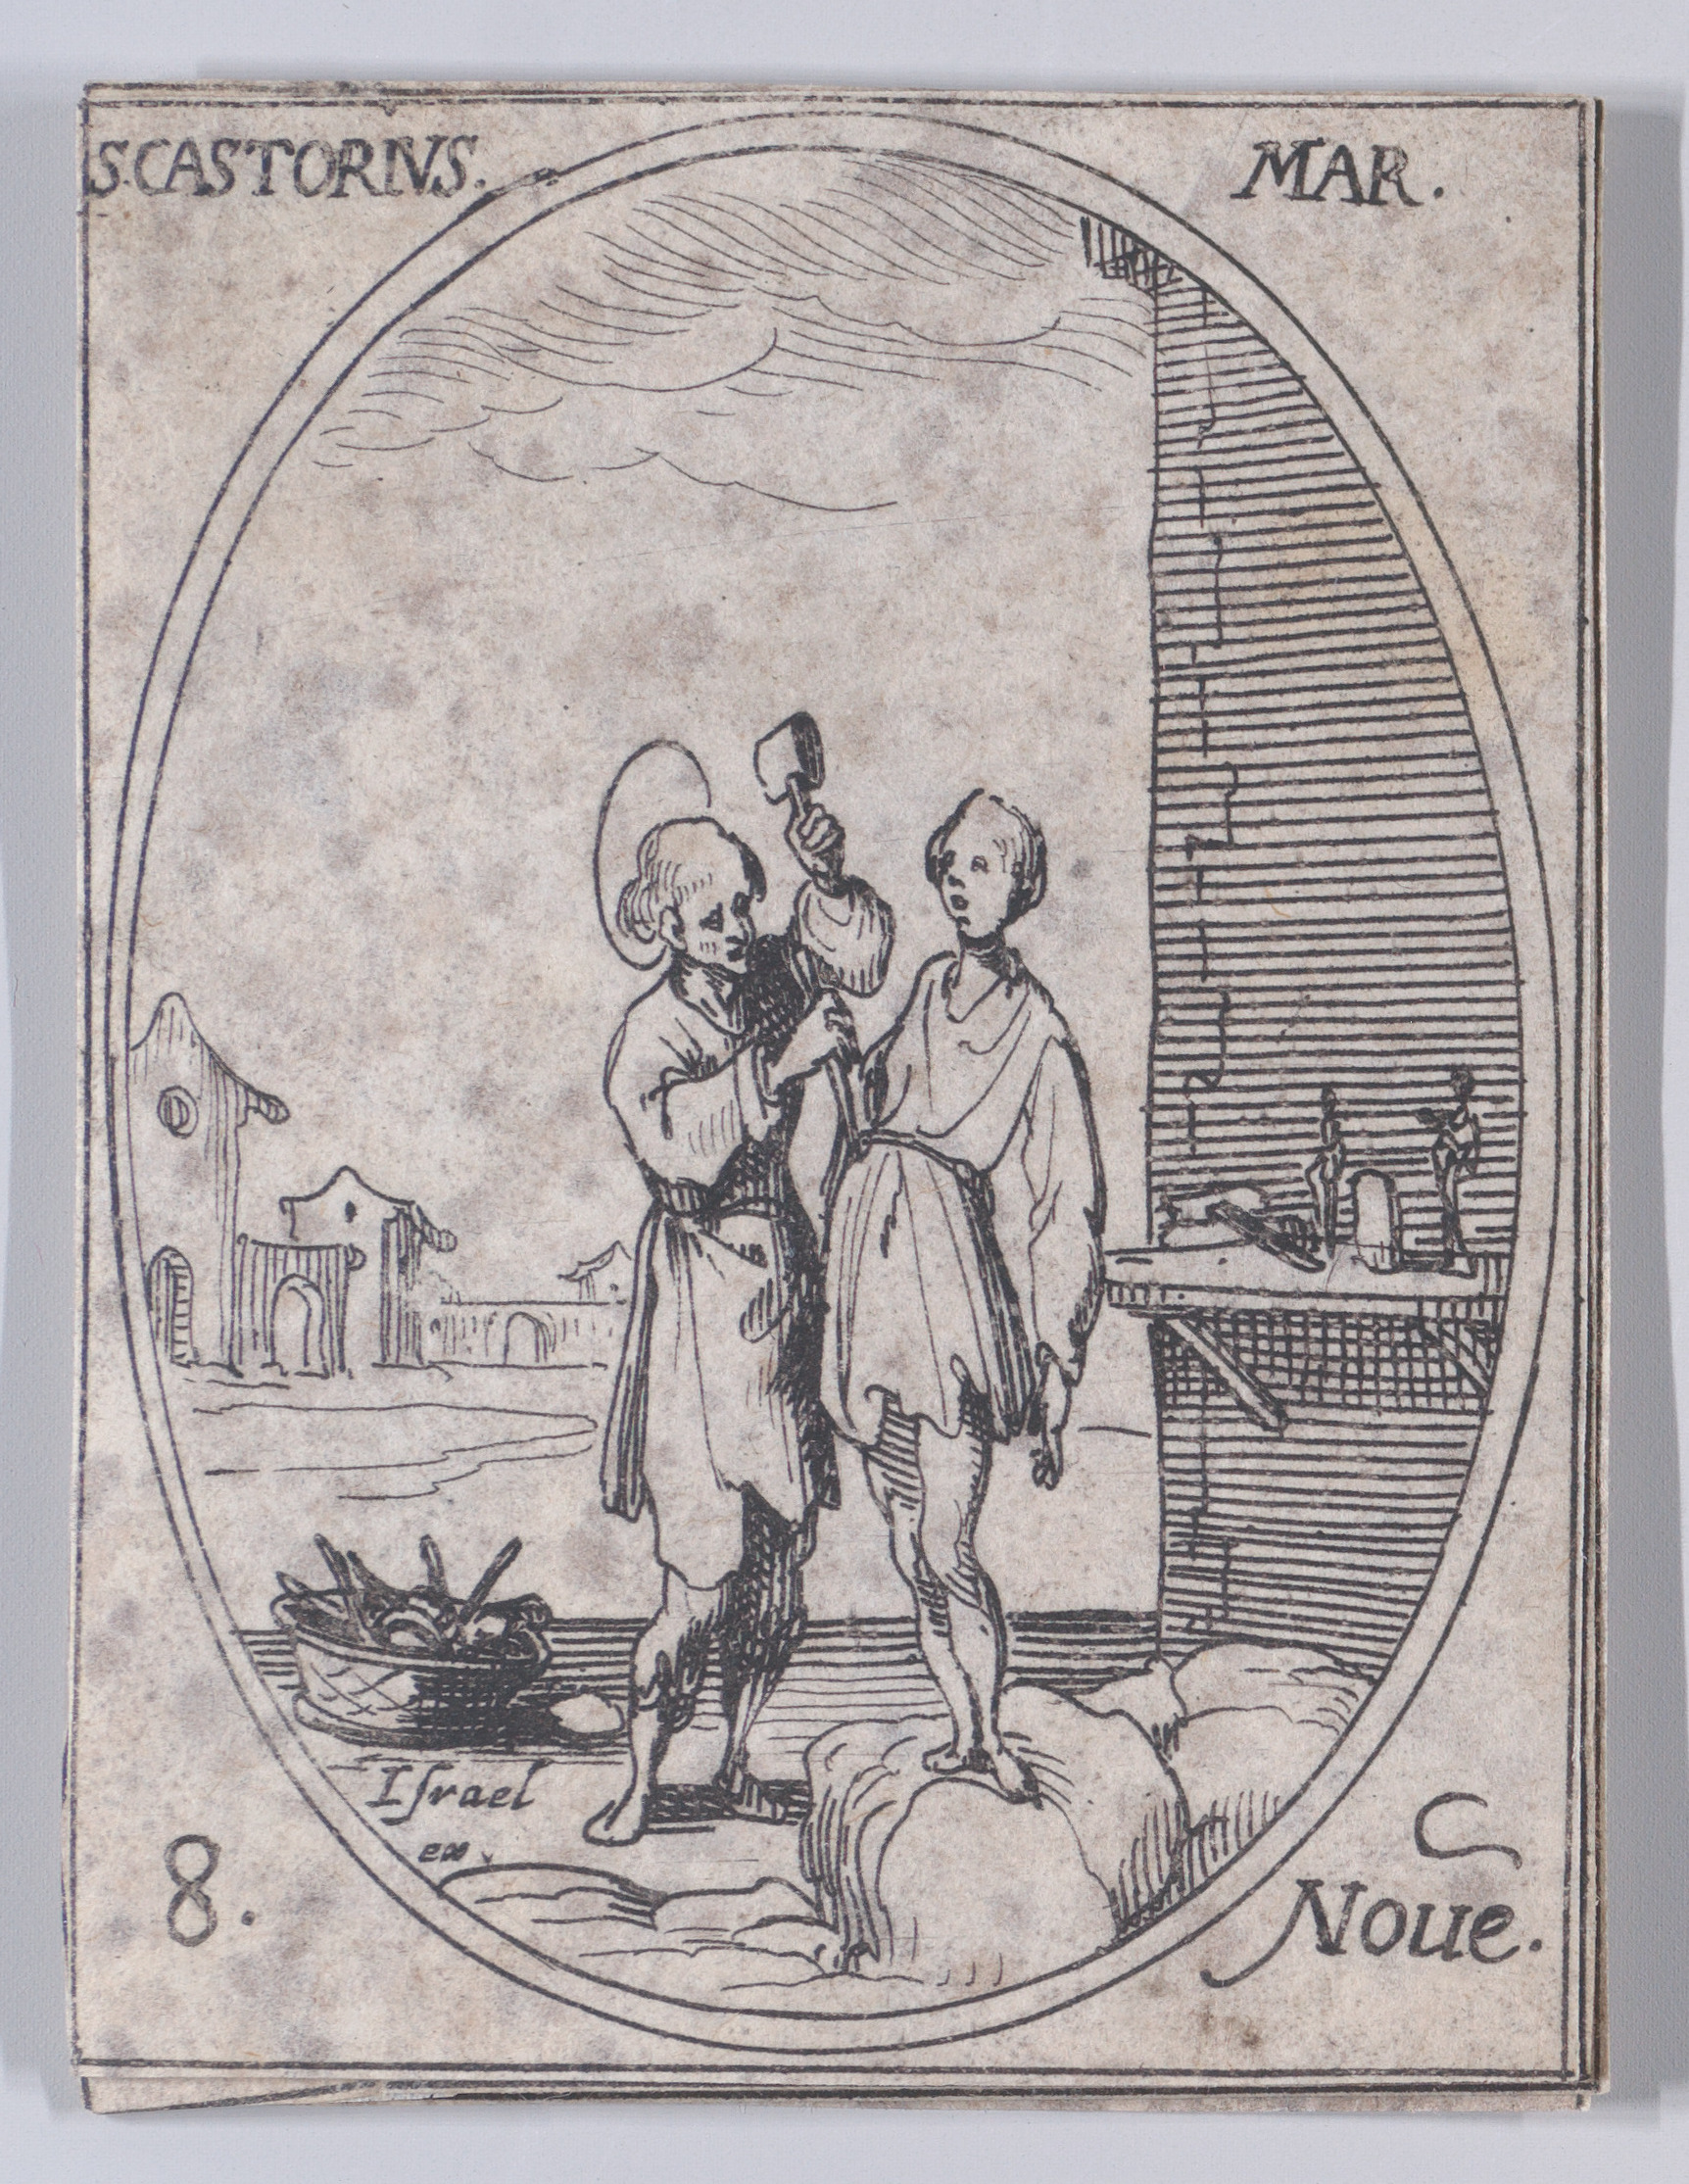 S. Castorie, martyr (St. Castorius, Martyr), November 8th, from Les Images De Tous Les Saincts et Saintes de L'Année (Images of All of the Saints and Religious Events of the Year), Jacques Callot (French, Nancy 1592–1635 Nancy), Etching; second state of two (Lieure)